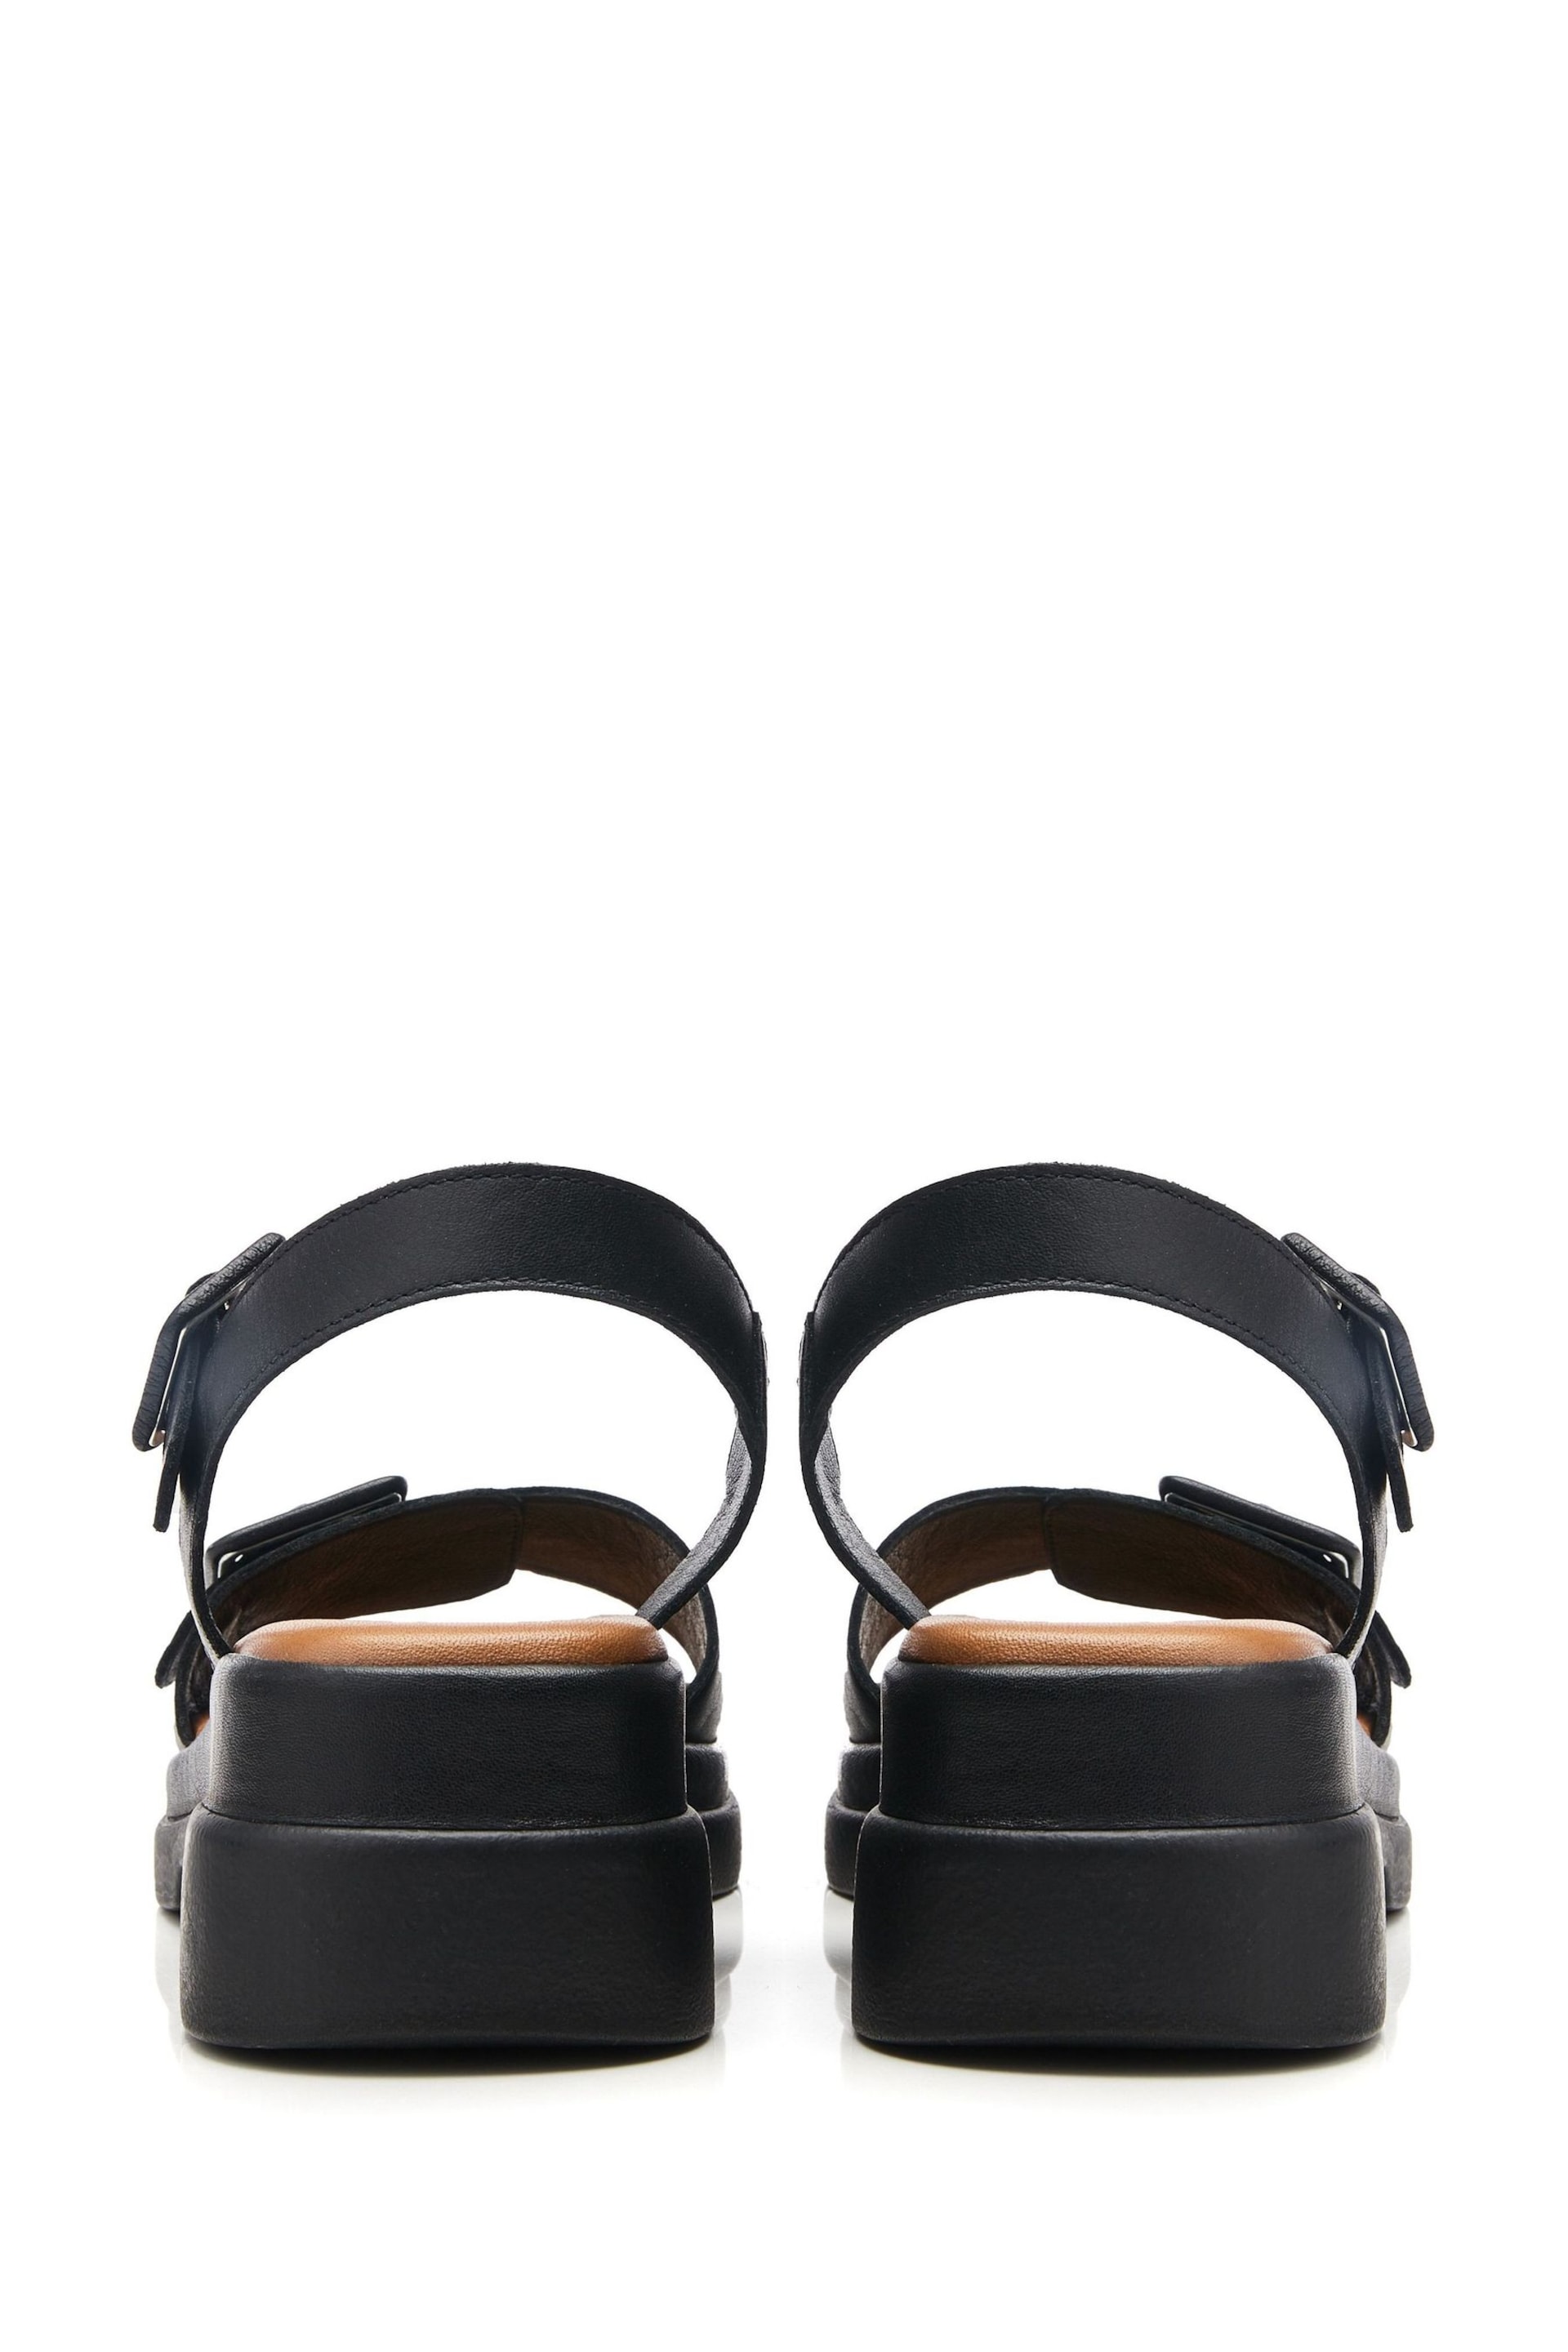 Moda in Pelle SH Shore Open Waist with Strap & Buckle Vamp Sandals - Image 3 of 4